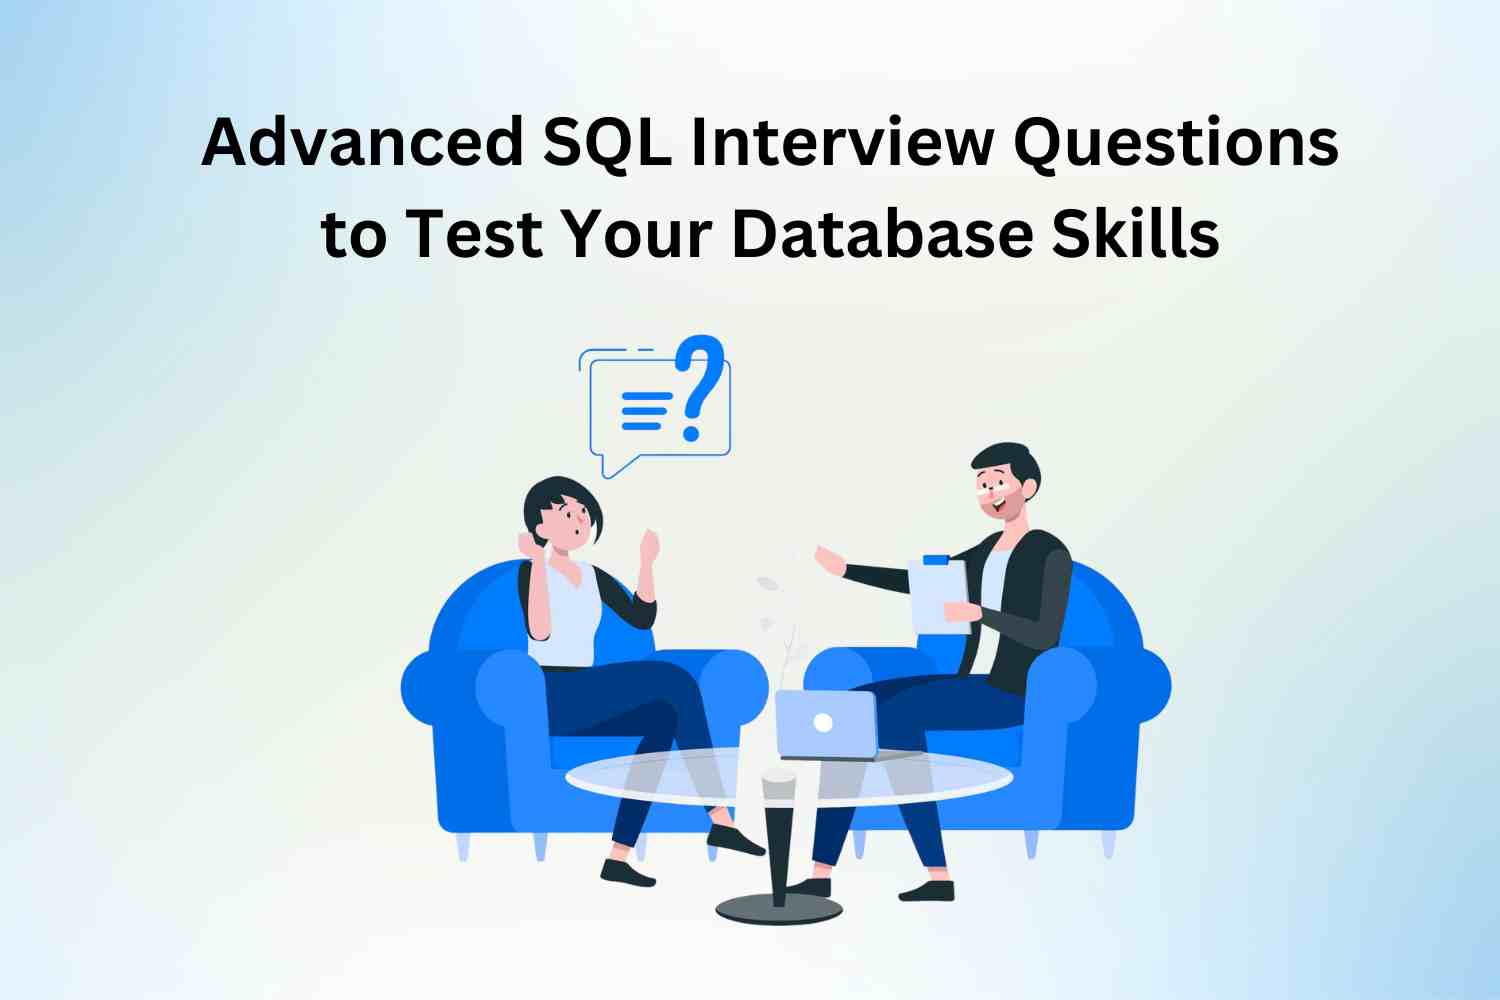 Advanced SQL Interview Questions to Test Your Database Skills